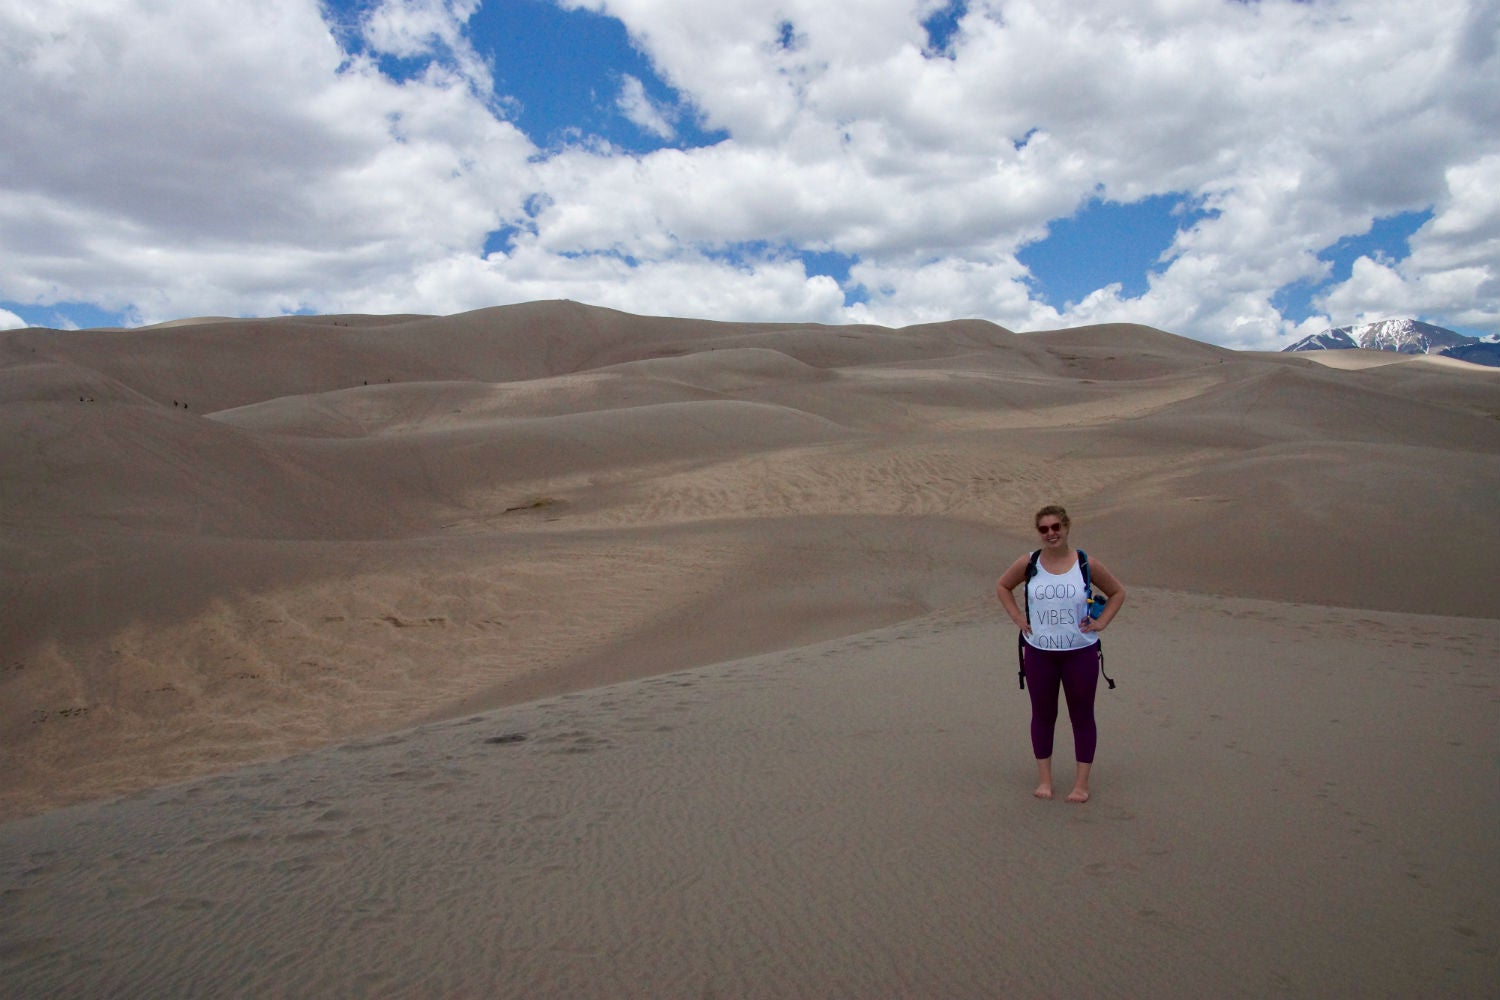 kelsey and sand dunes on her budget camping trip